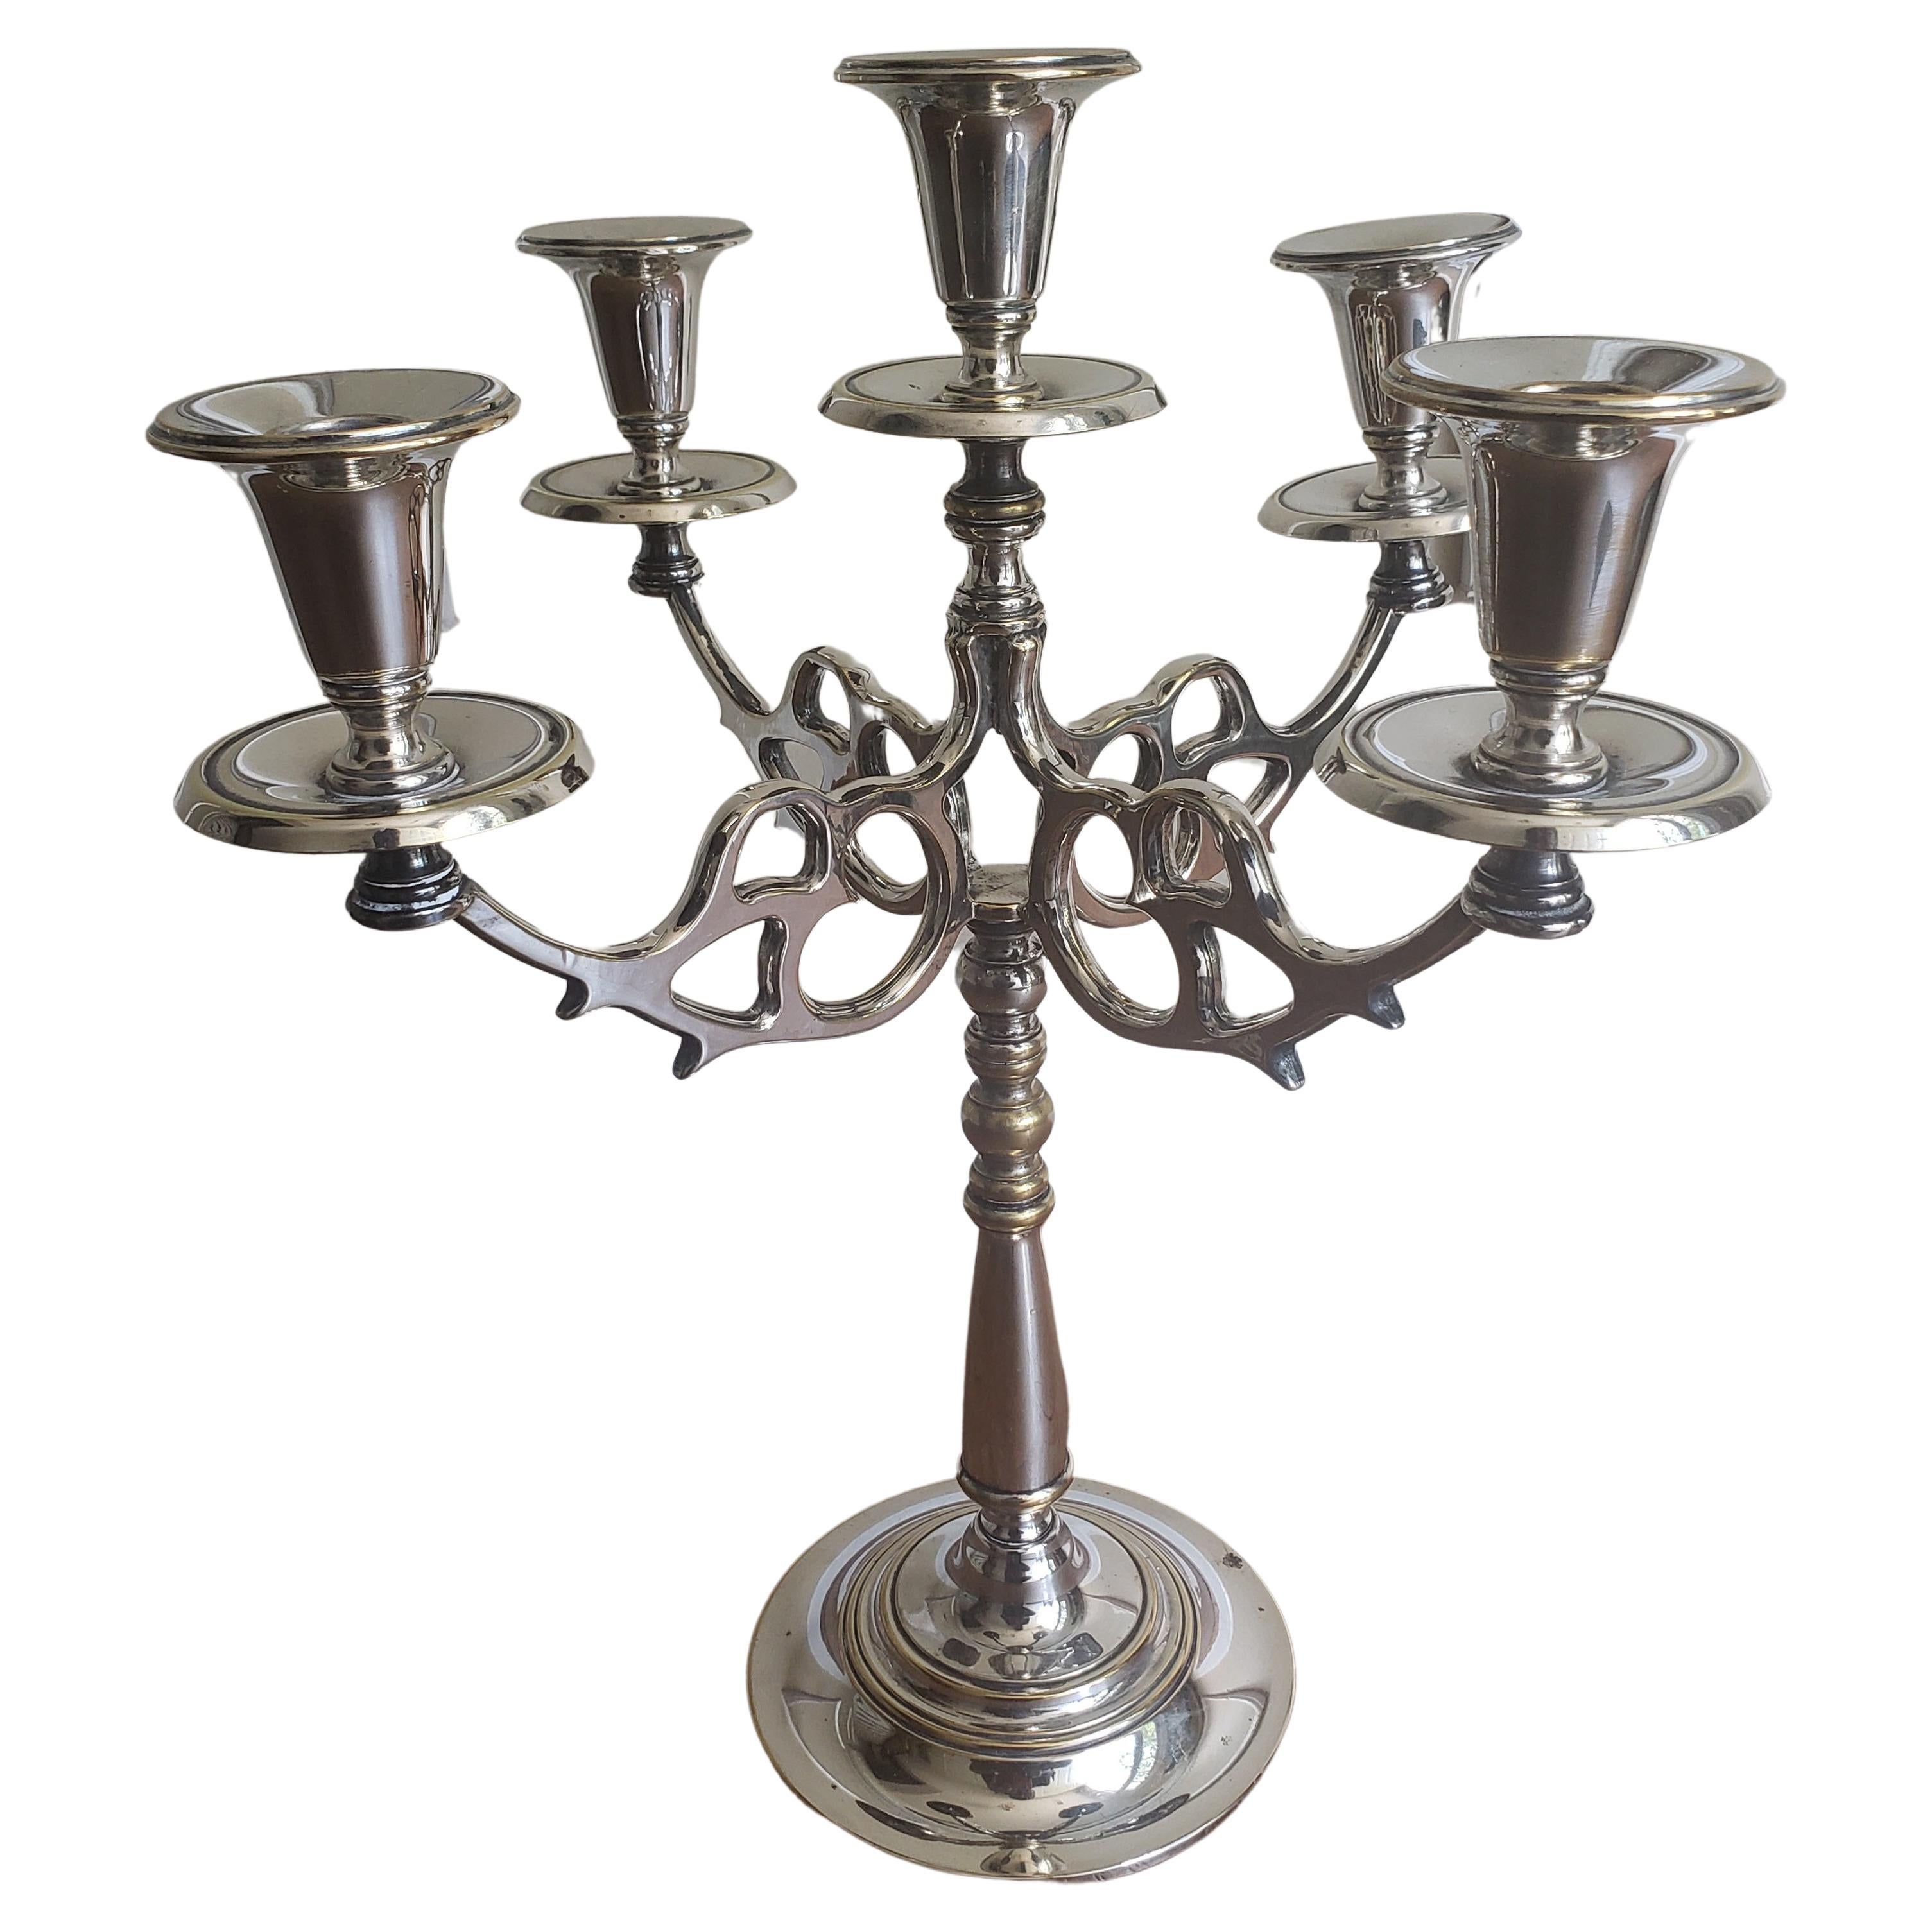 D. W. Haber and Son Silver Plated  Art Nouveau Silver Plated 5 Arm Candelabrum For Sale